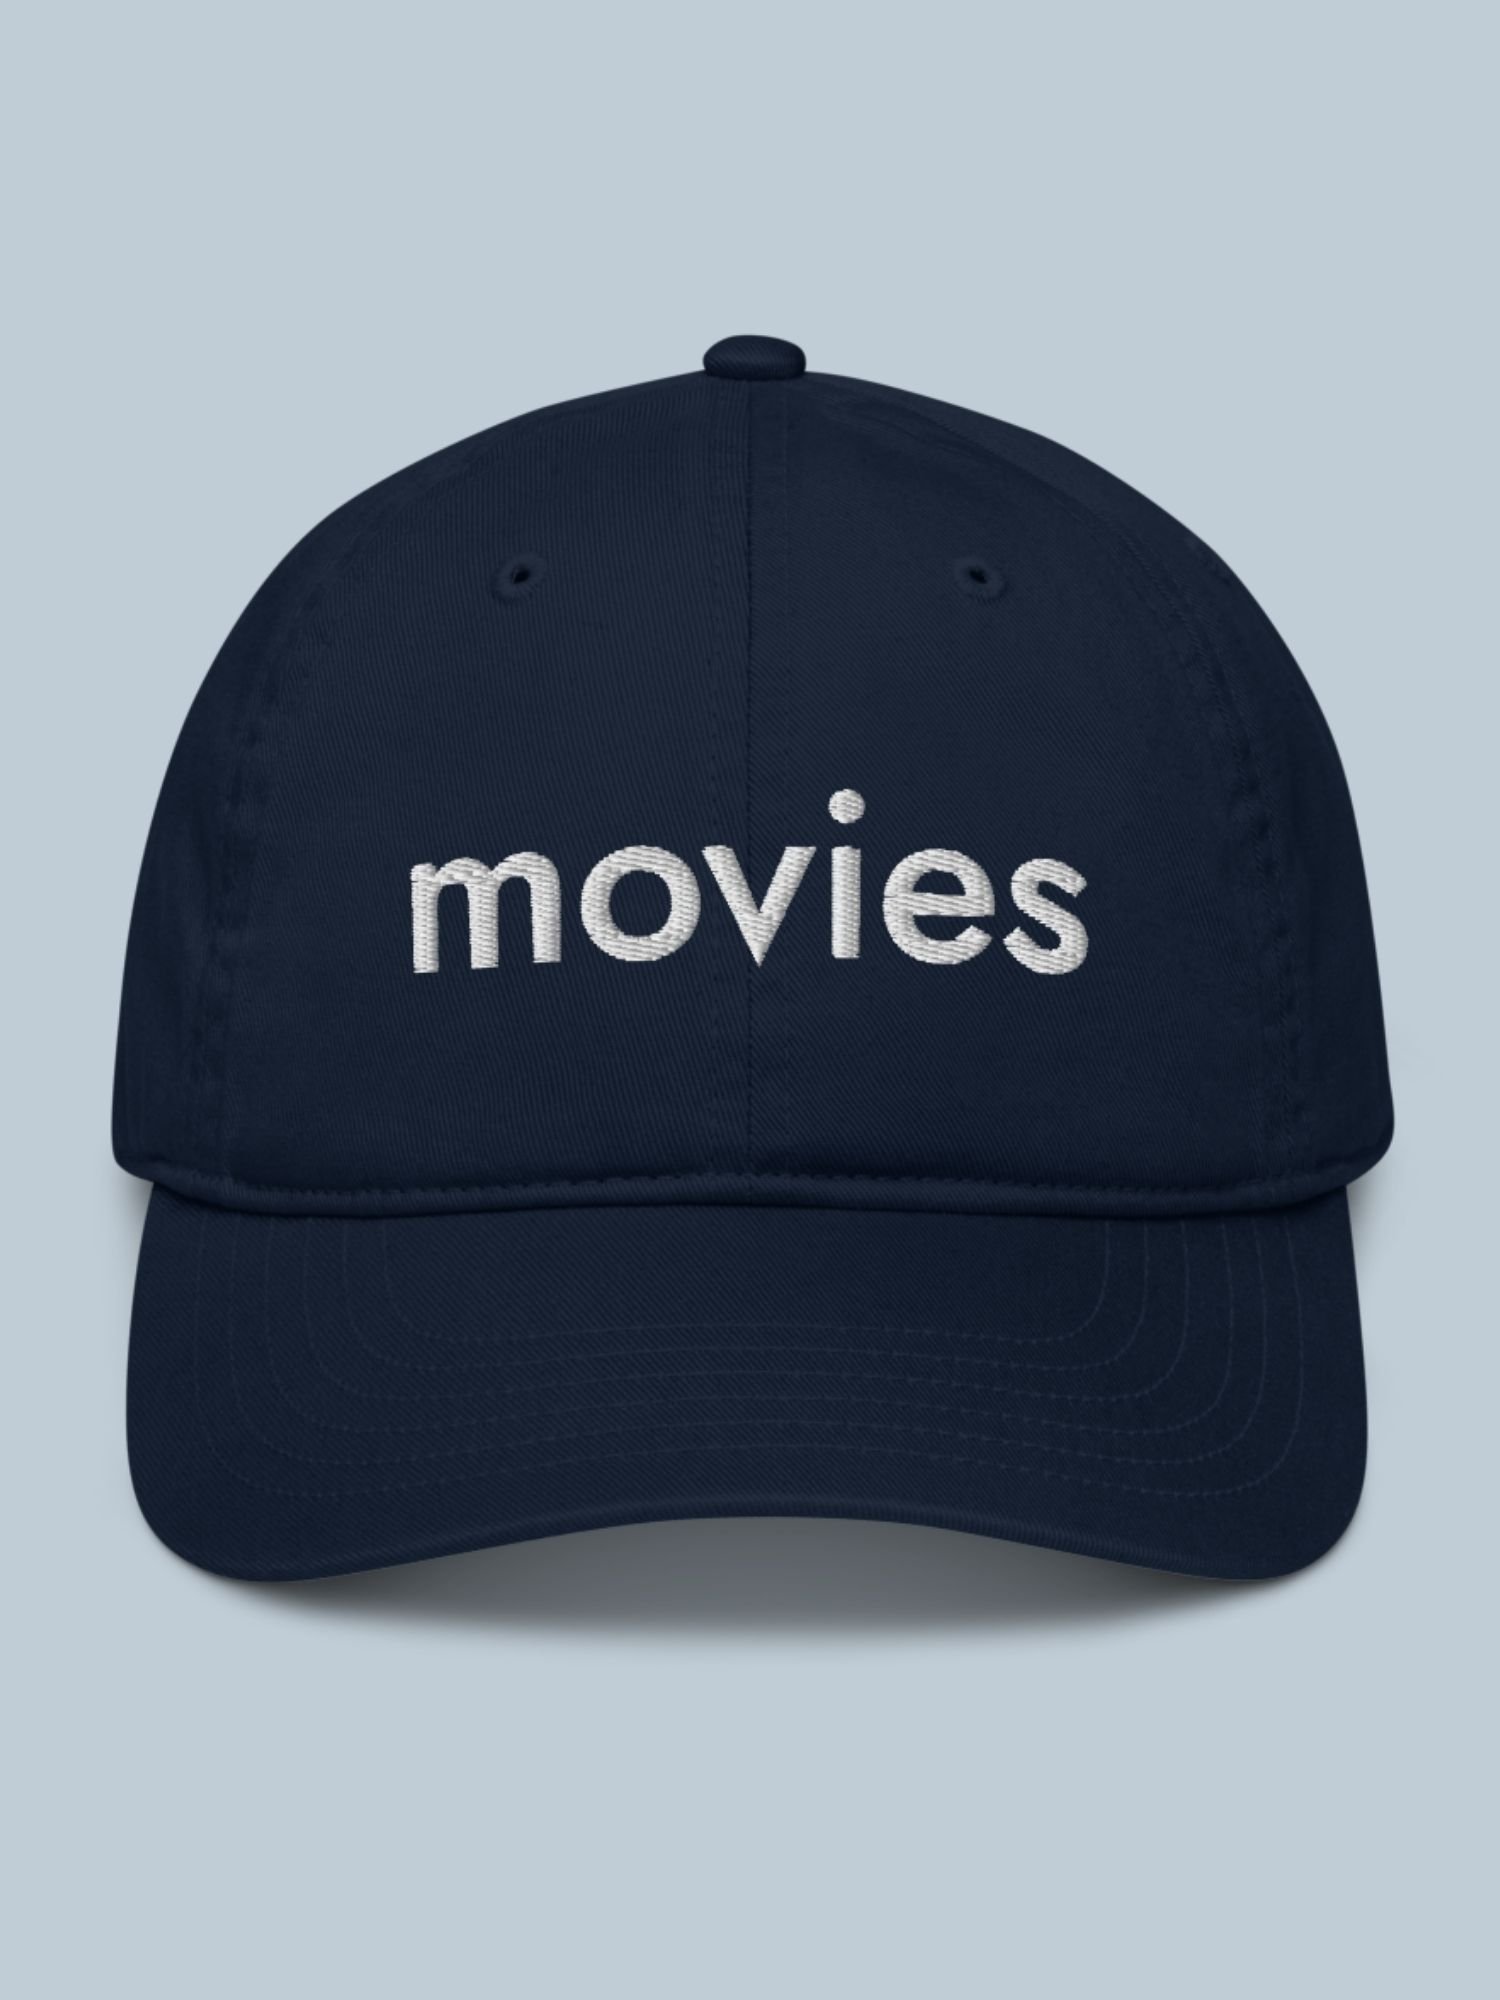 A Hat That Says Movies On it — Movies Brand